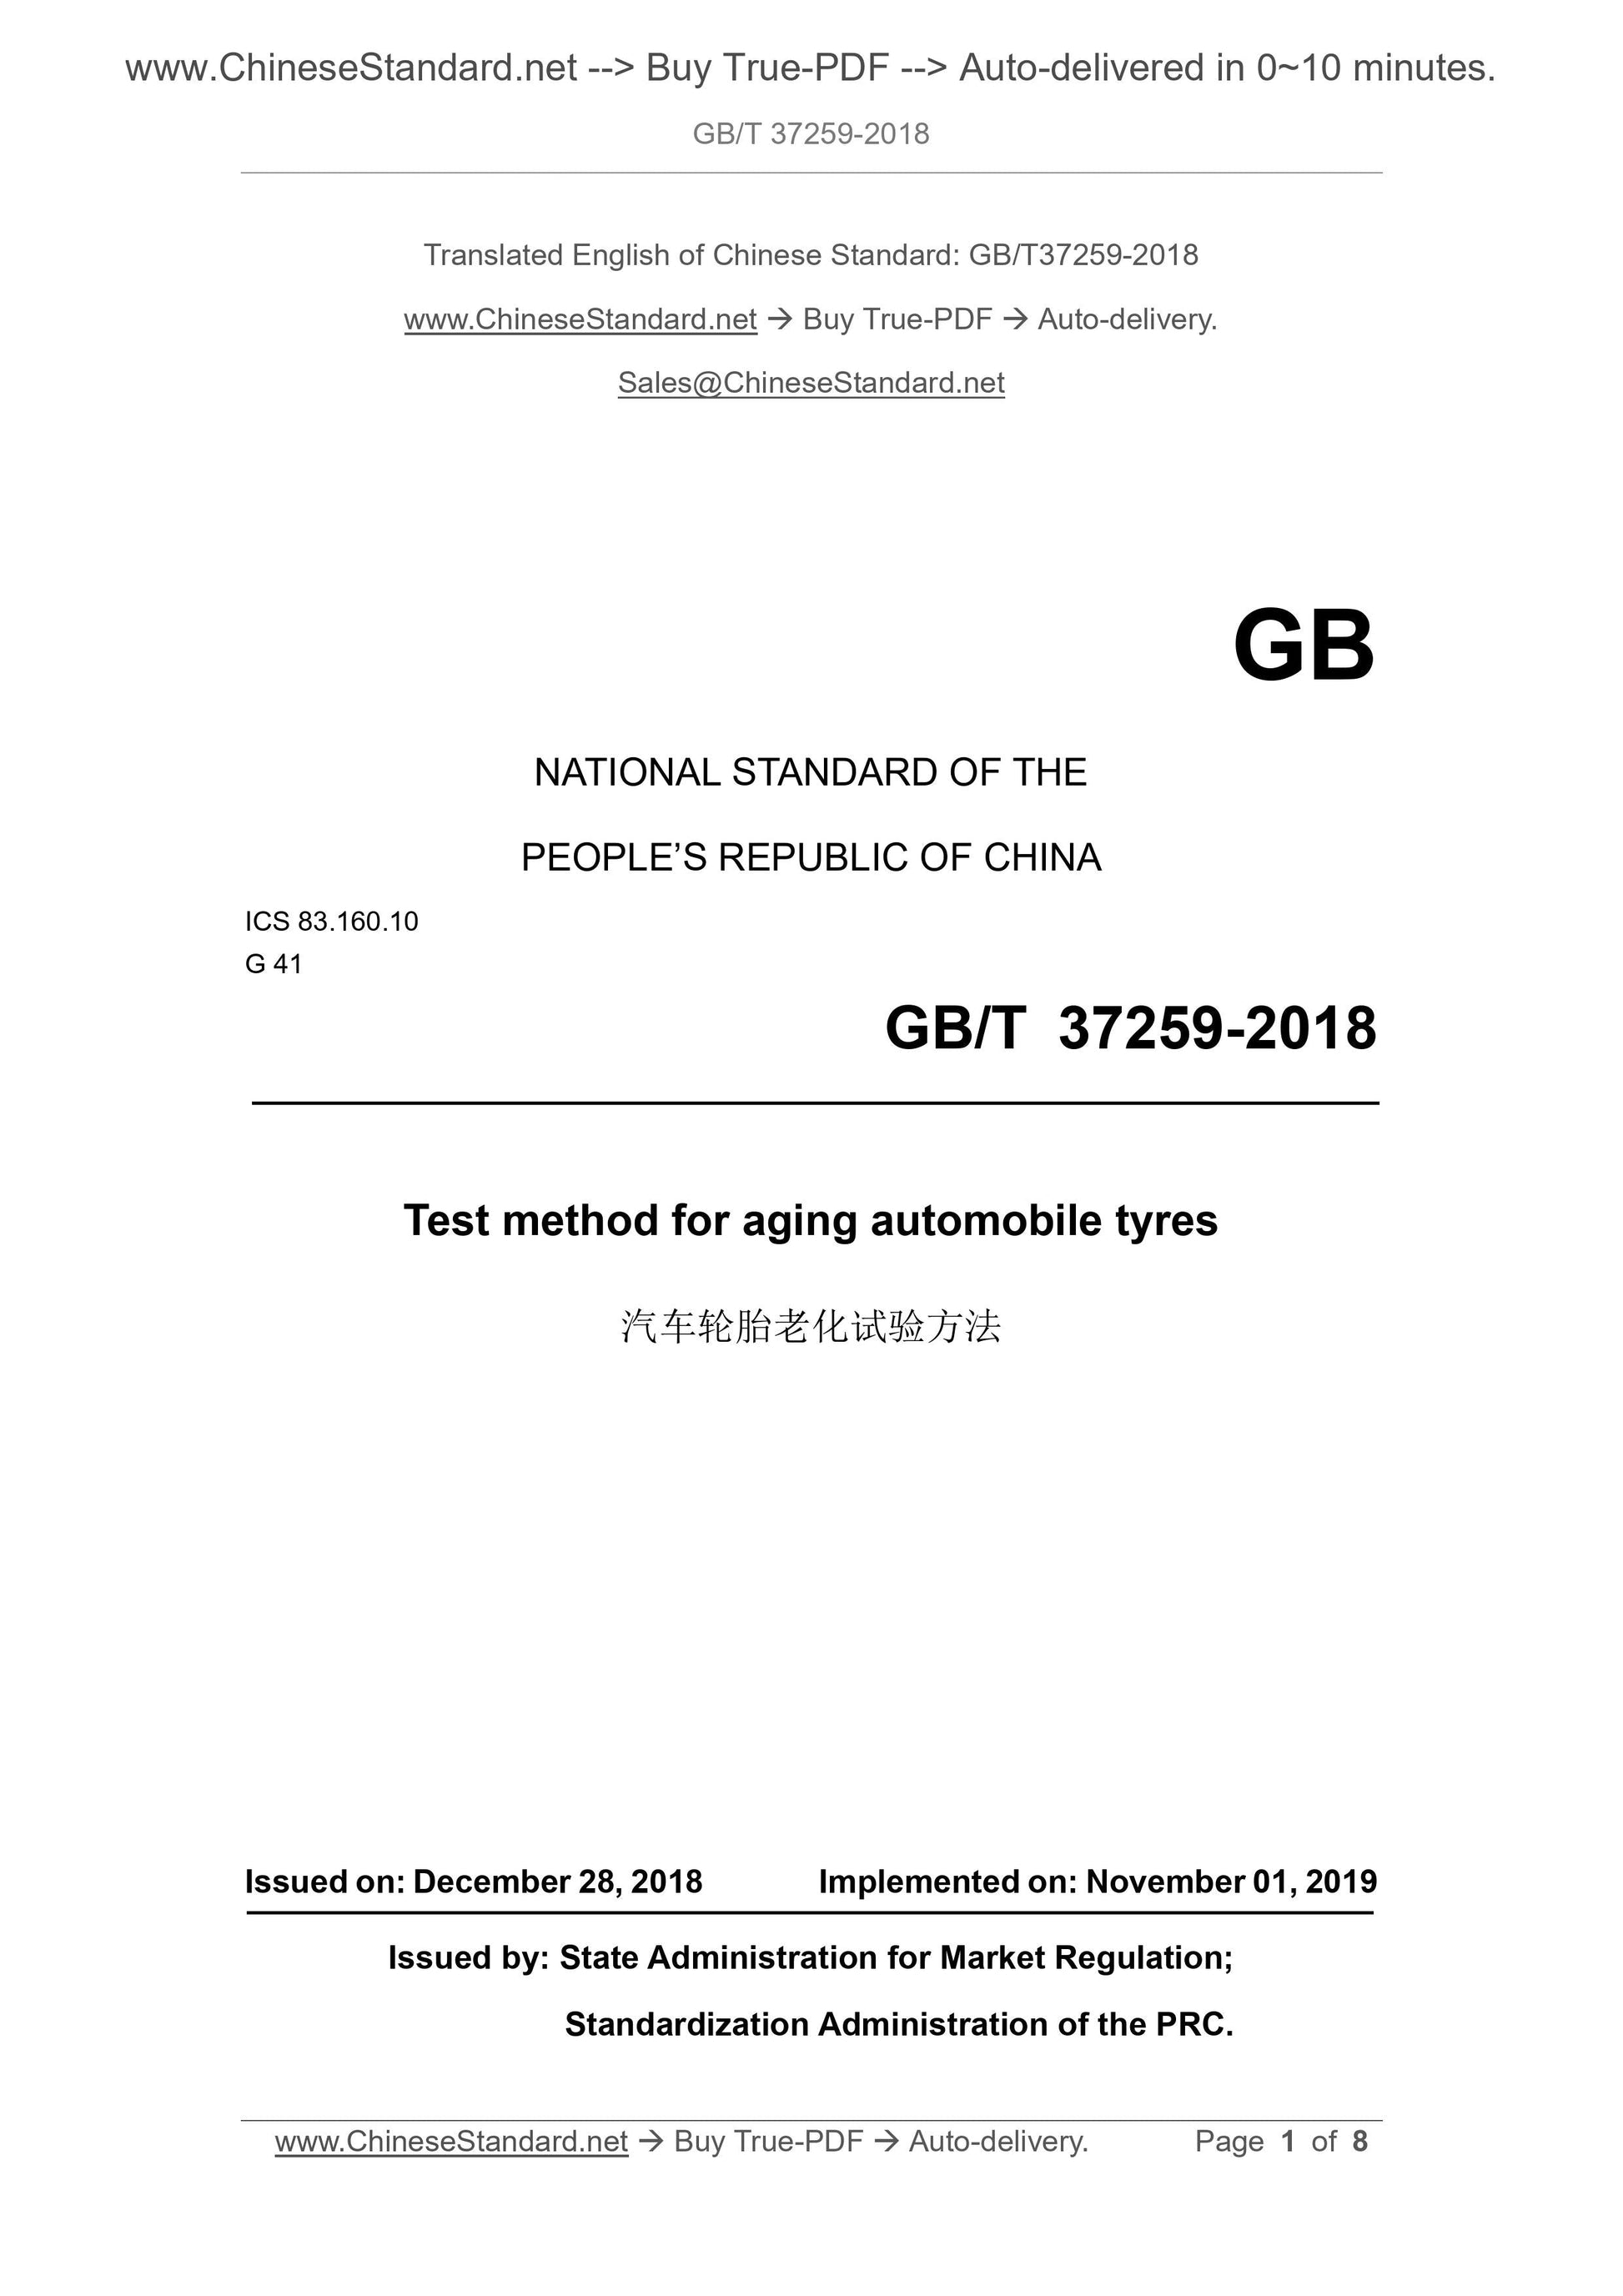 GB/T 37259-2018 Page 1